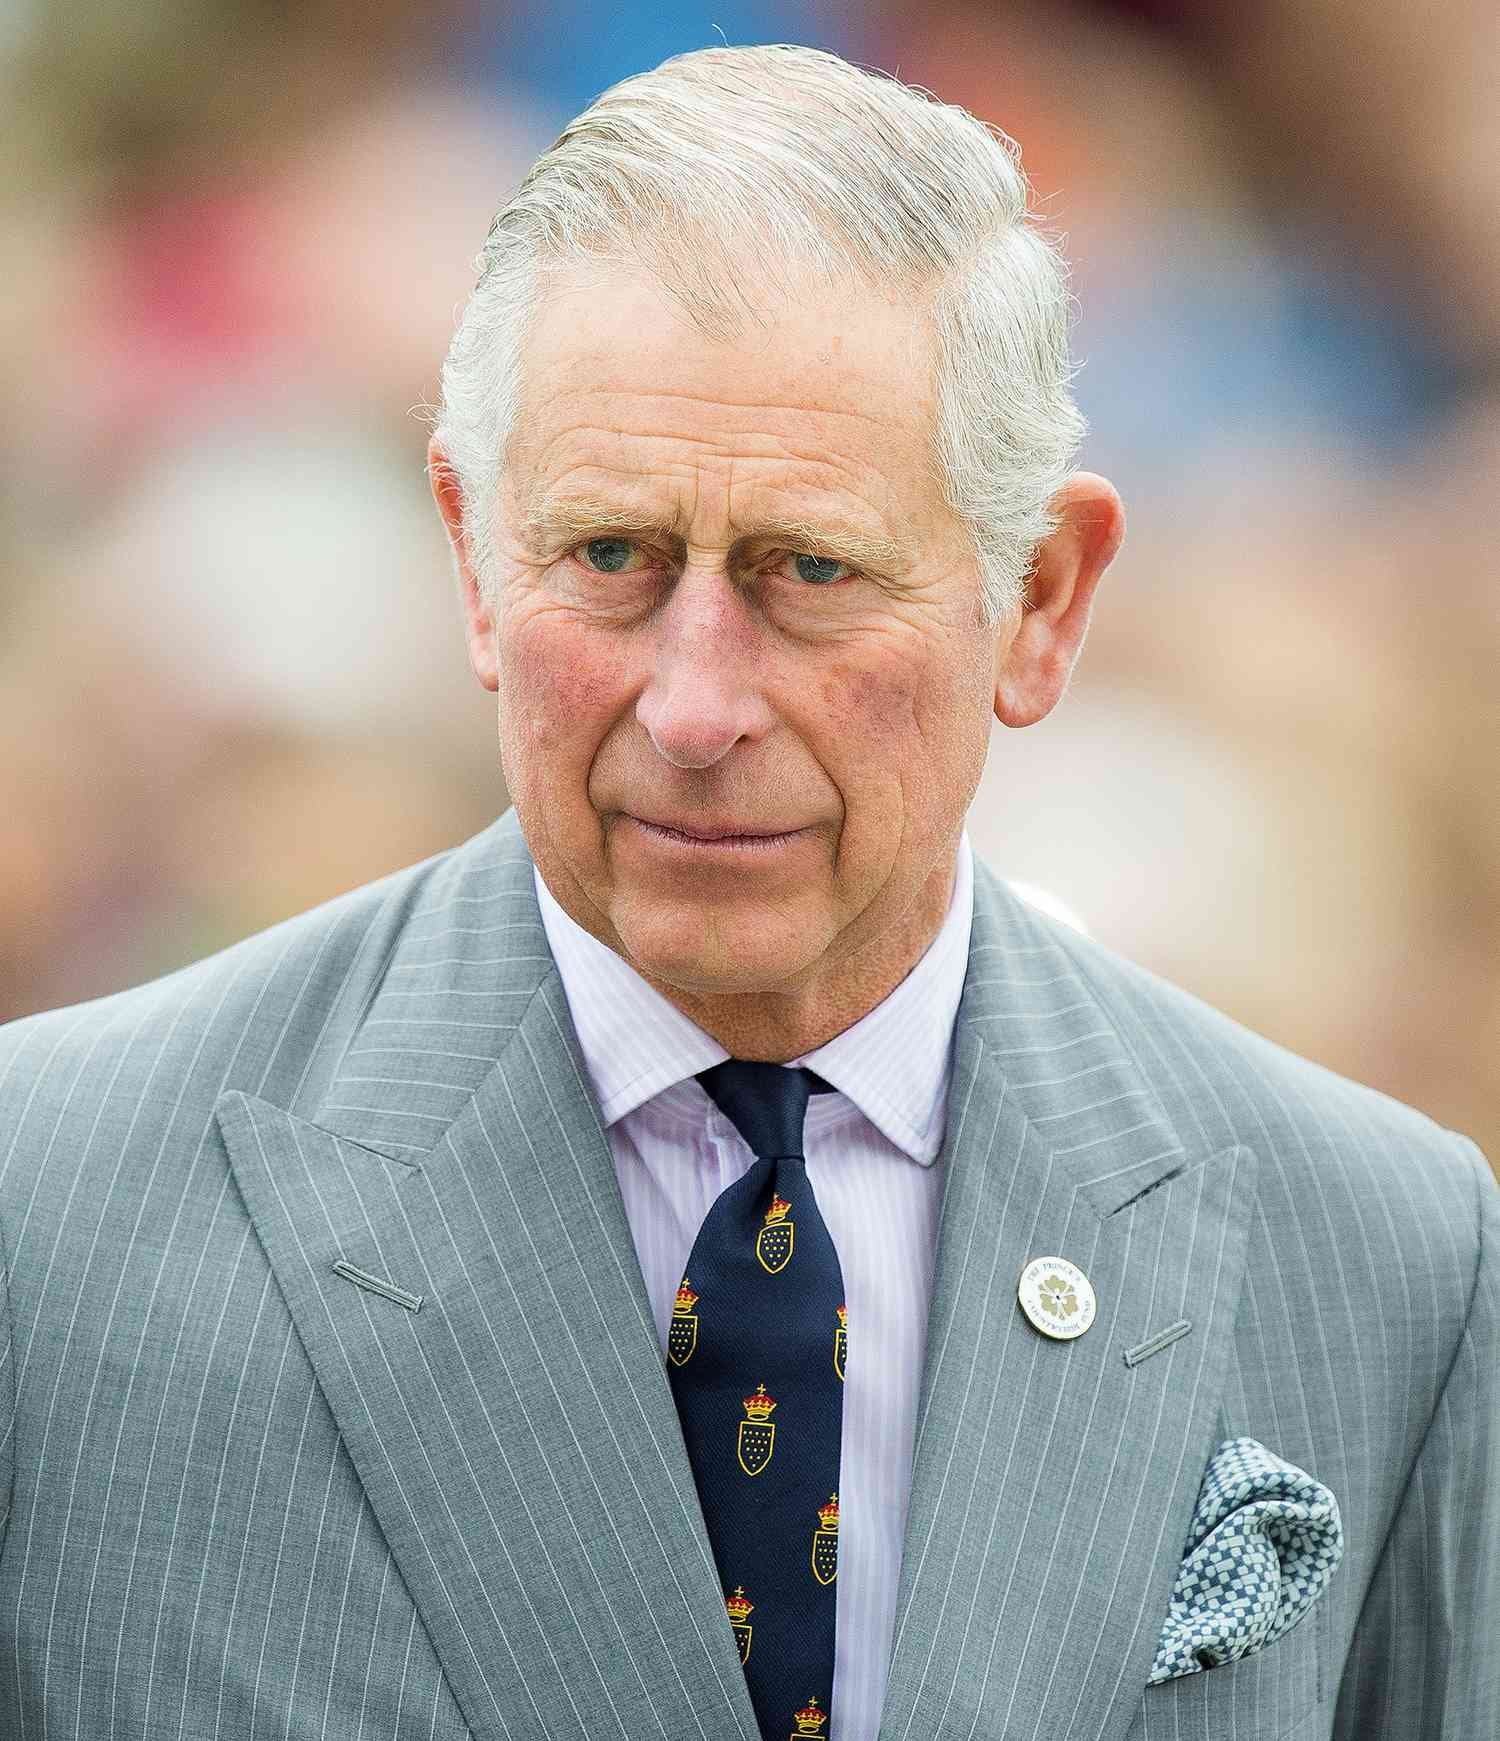 'Stunned' Writer Slams Prince Charles for Alleged Racially Insensitive Comment